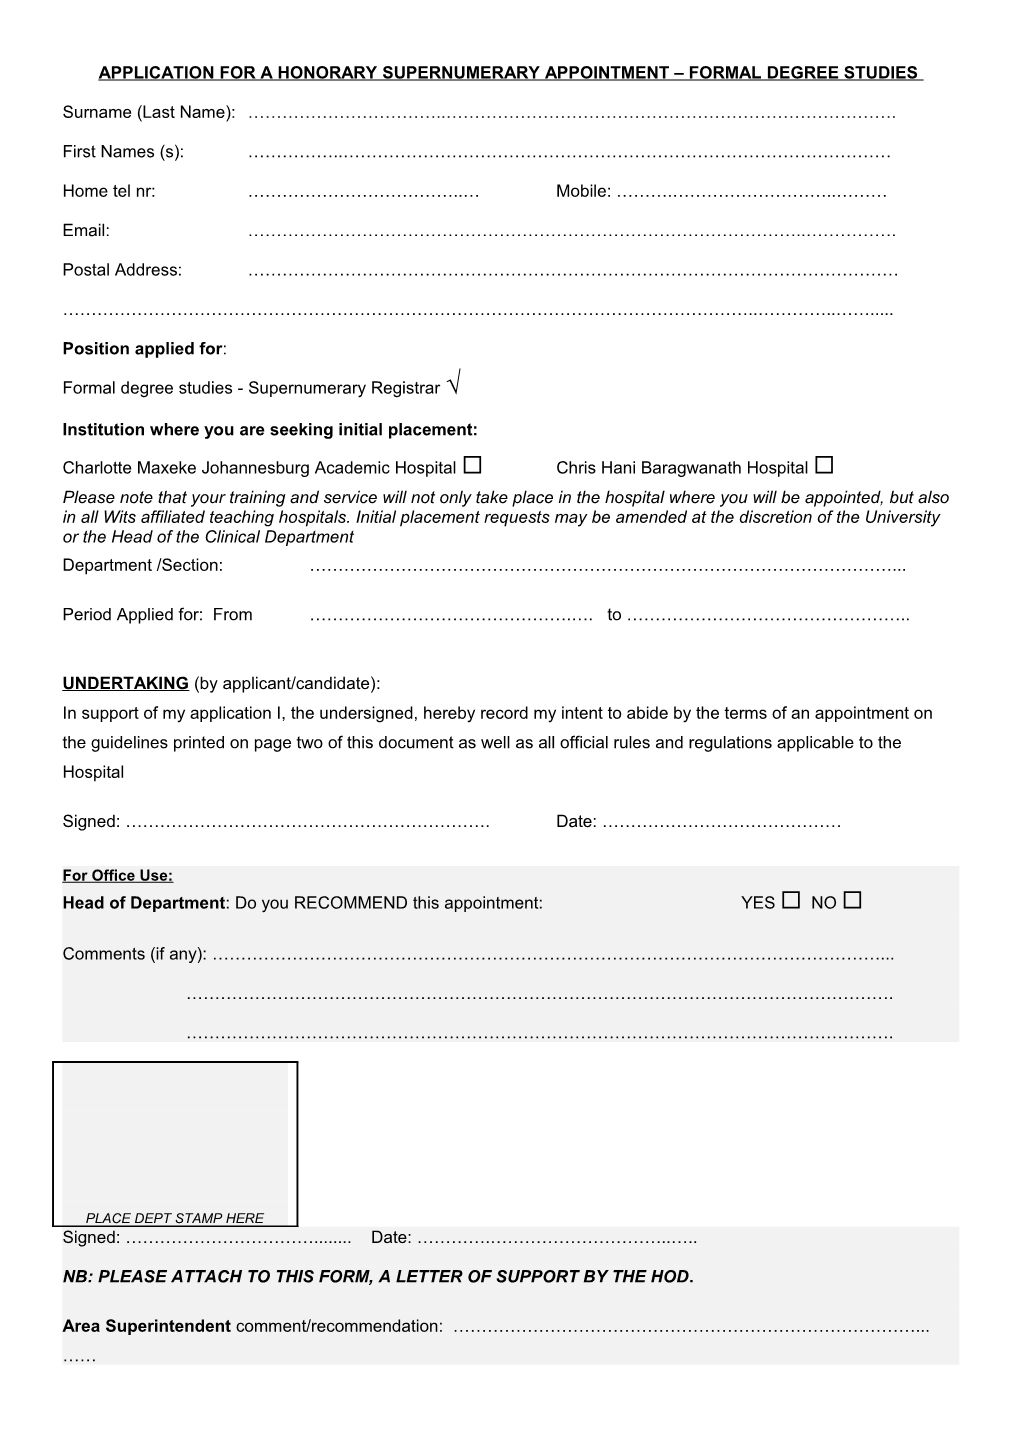 Application for Ahonorary Supernumerary Appointment Formal Degree Studies